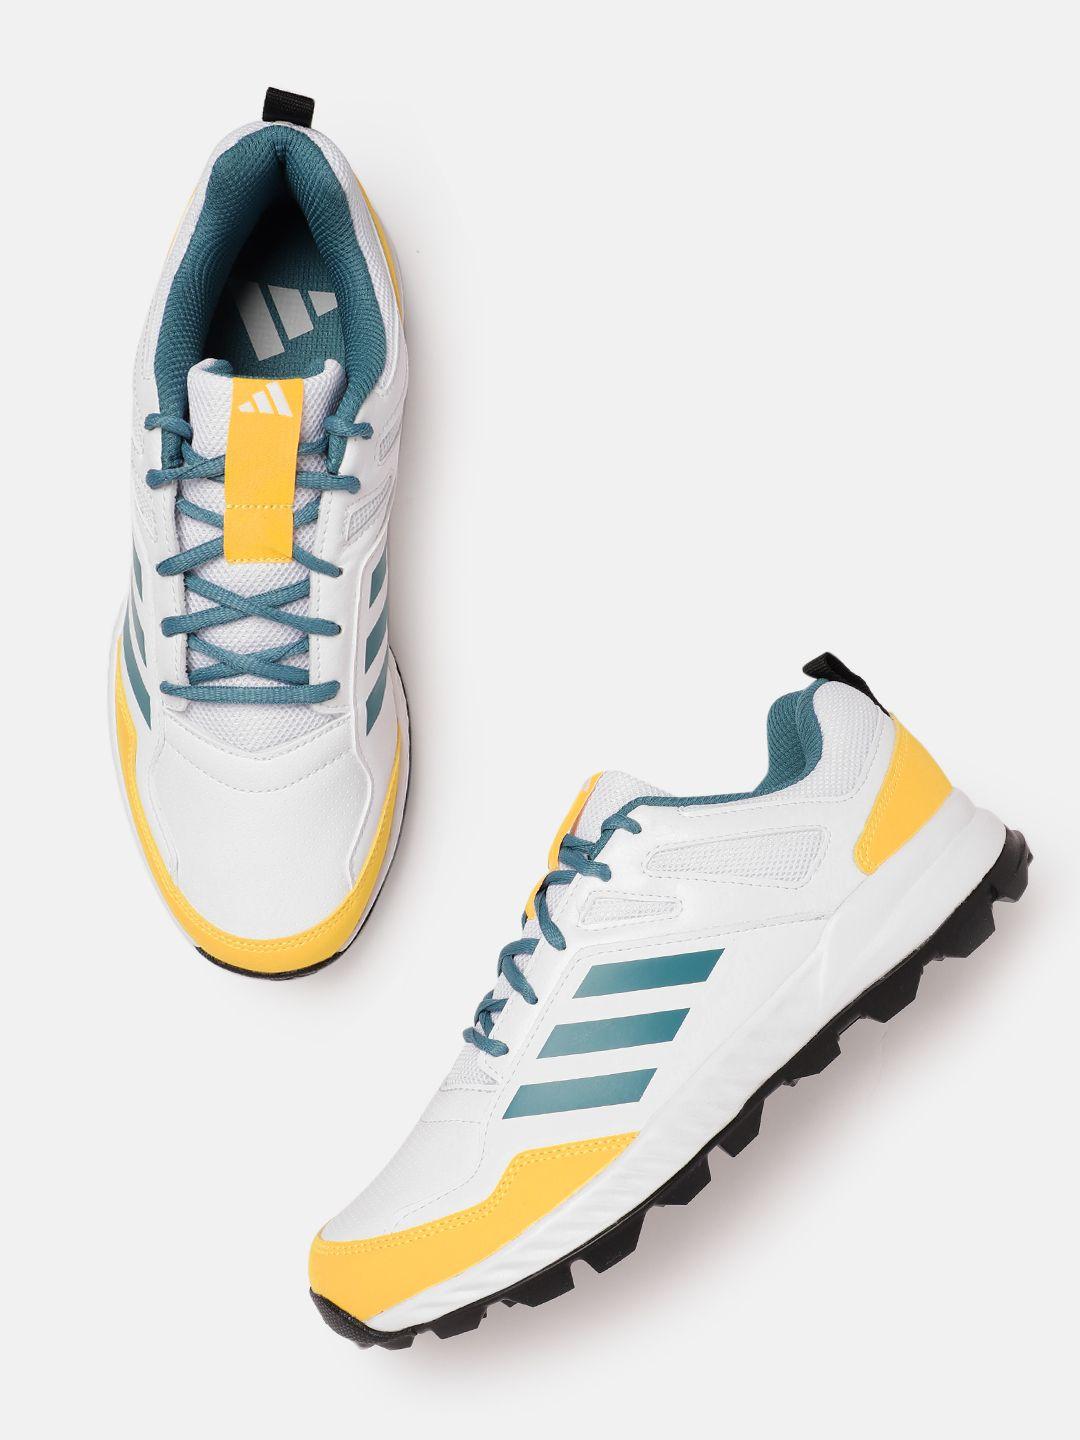 adidas-men-woven-design-round-toe-cri-rise-v2-cricket-shoes-with-striped-detail